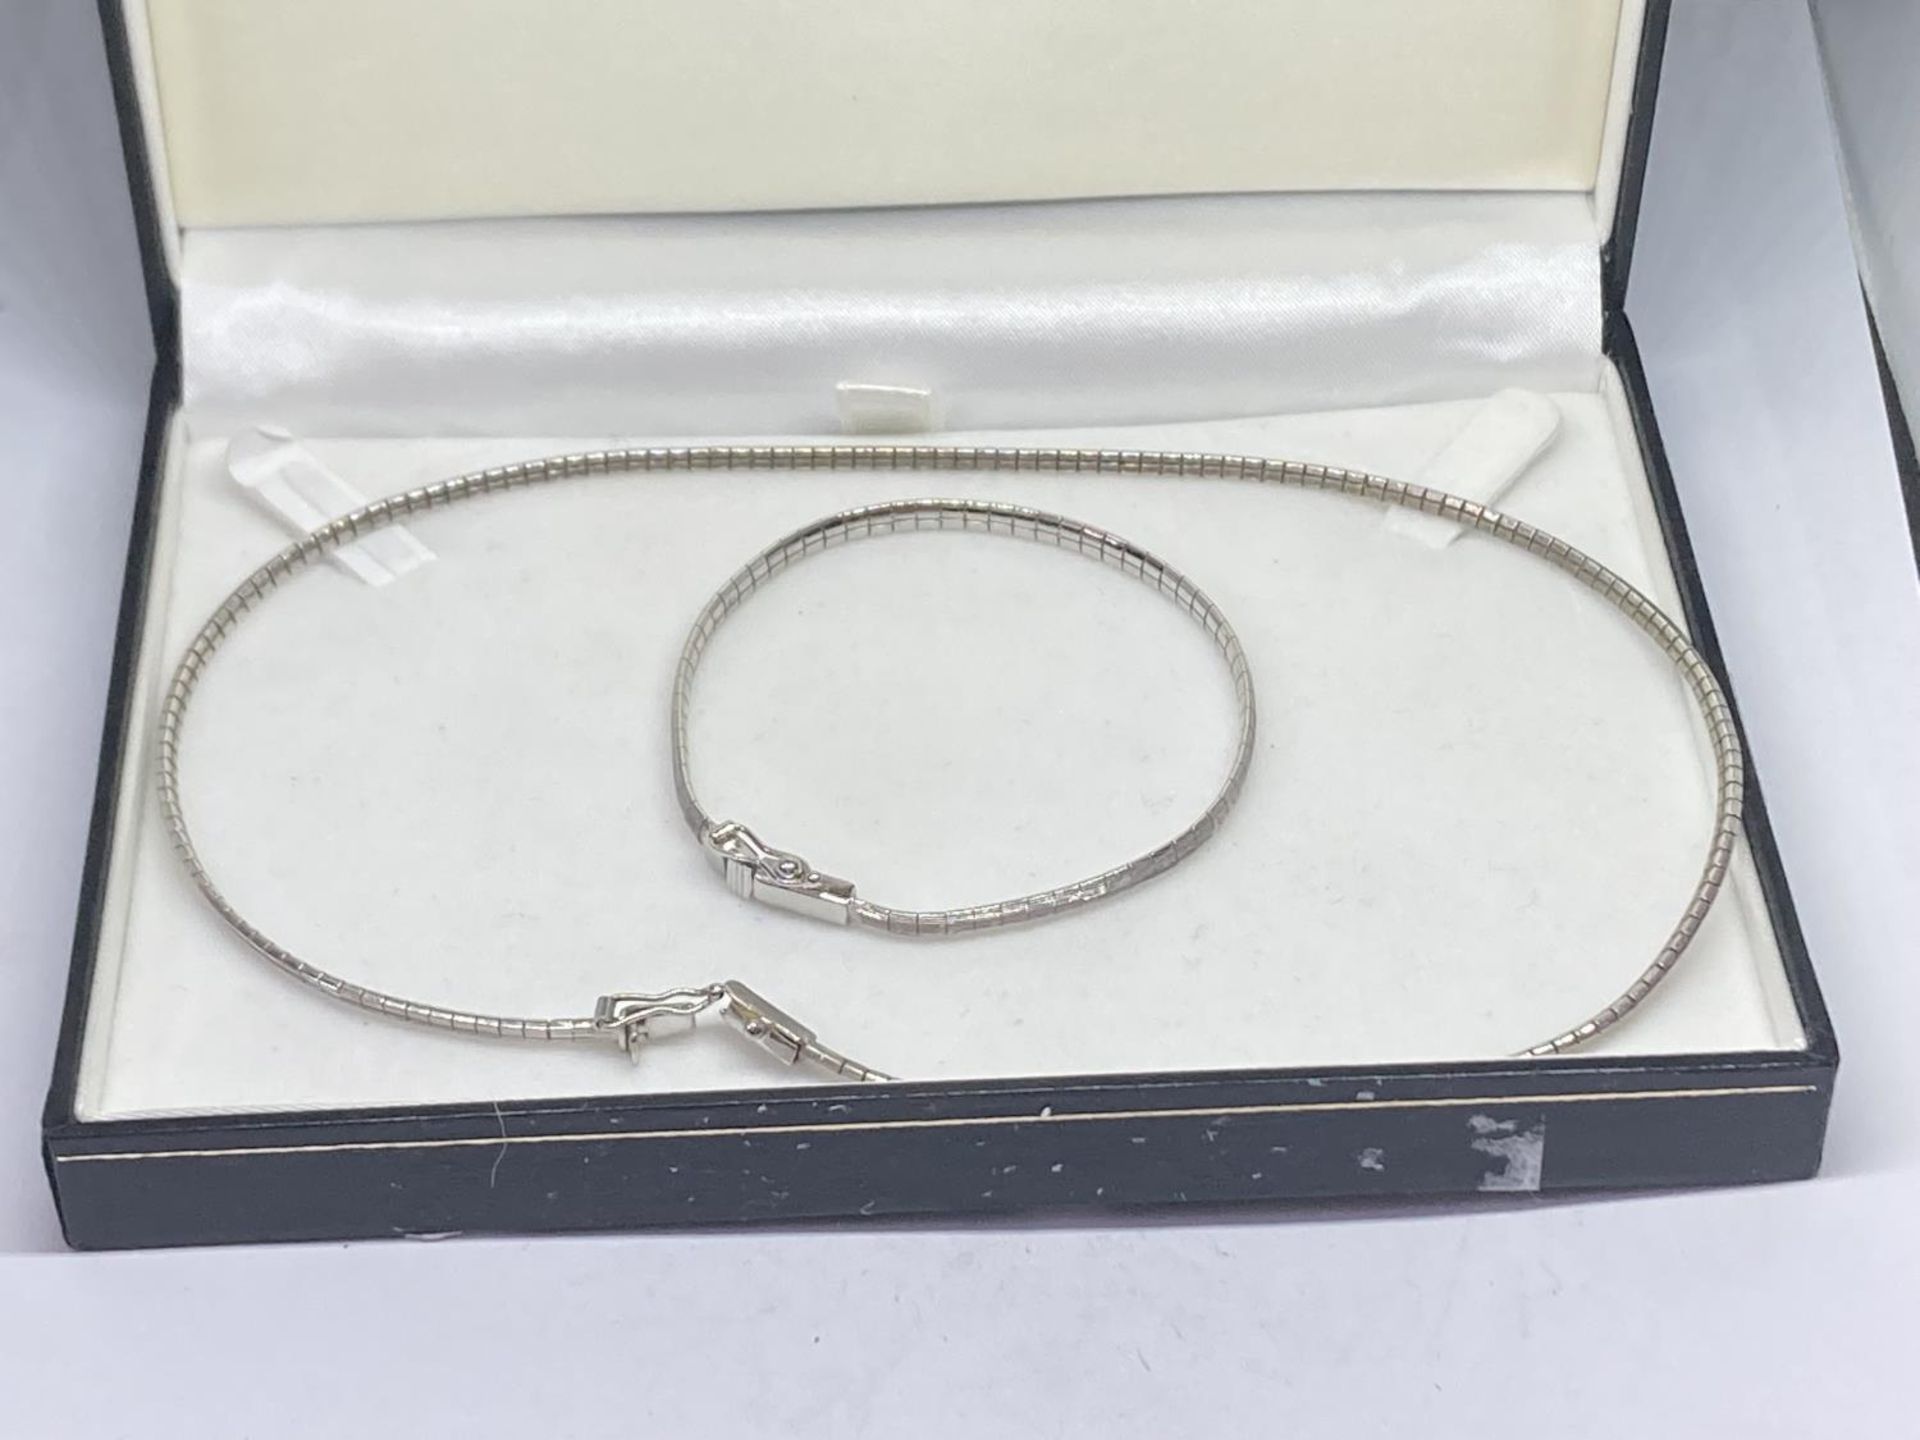 A SILVER NECKLACE AND MATCHING BRACELET IN A PRESENTATION BOX